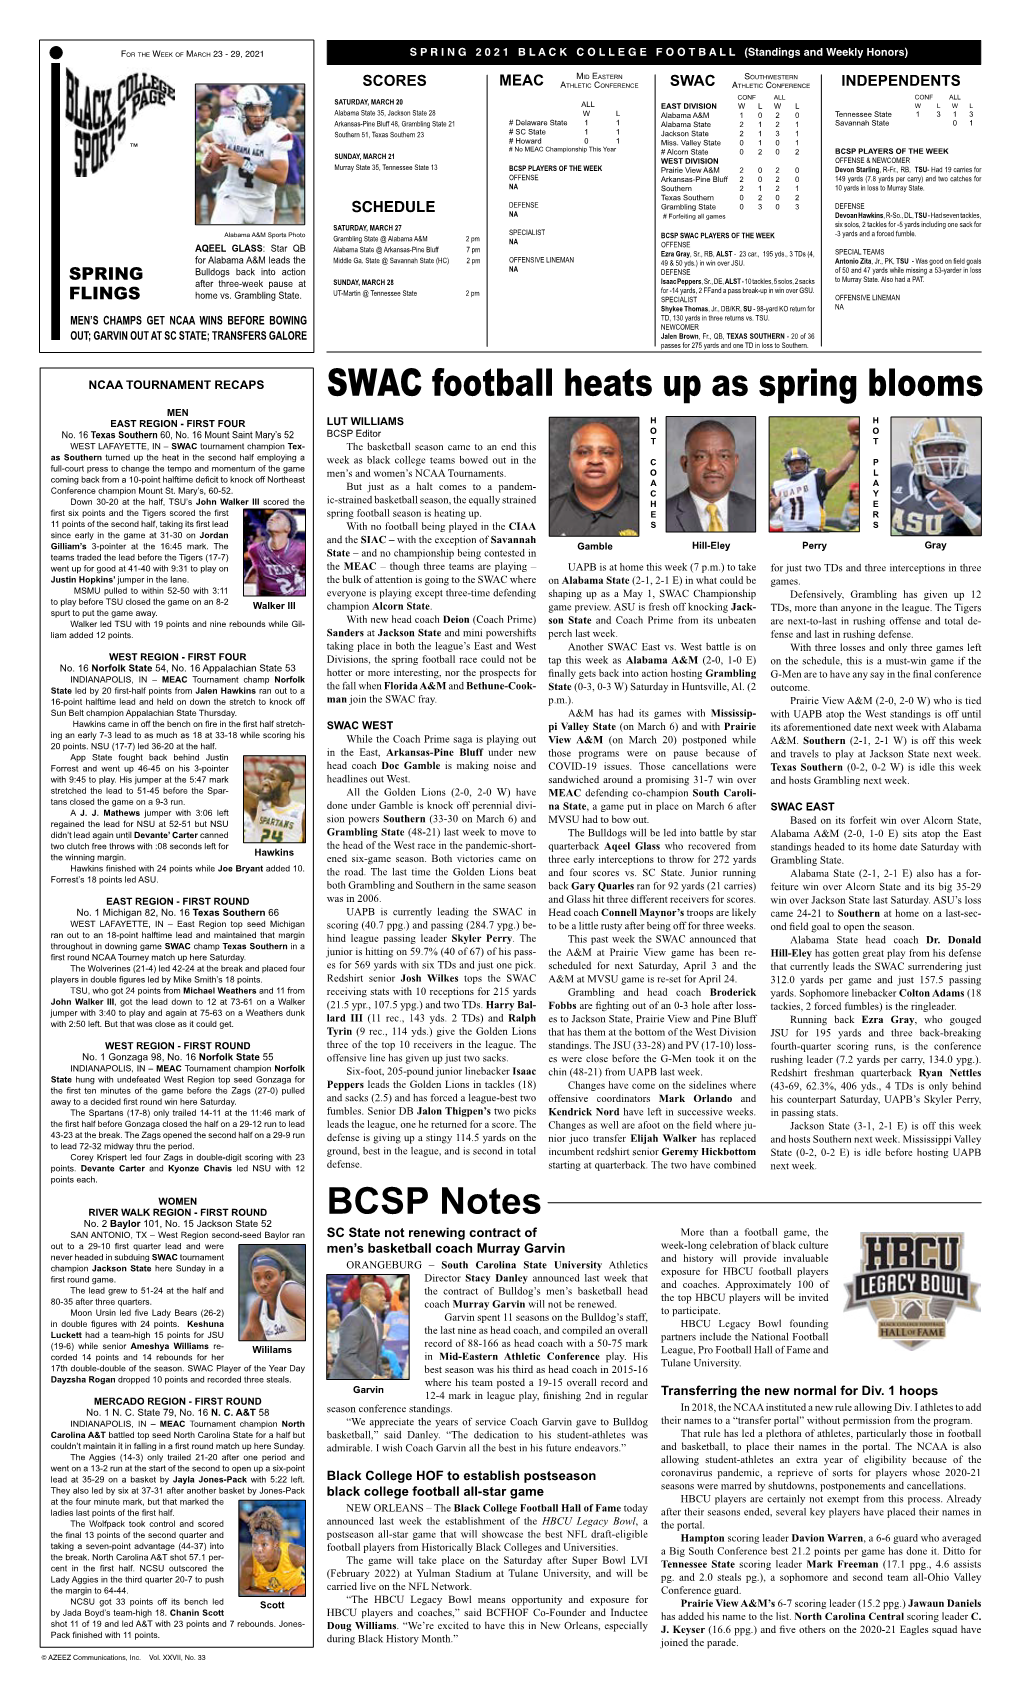 SWAC Football Heats up As Spring Blooms MEN EAST REGION - FIRST FOUR LUT WILLIAMS H H No